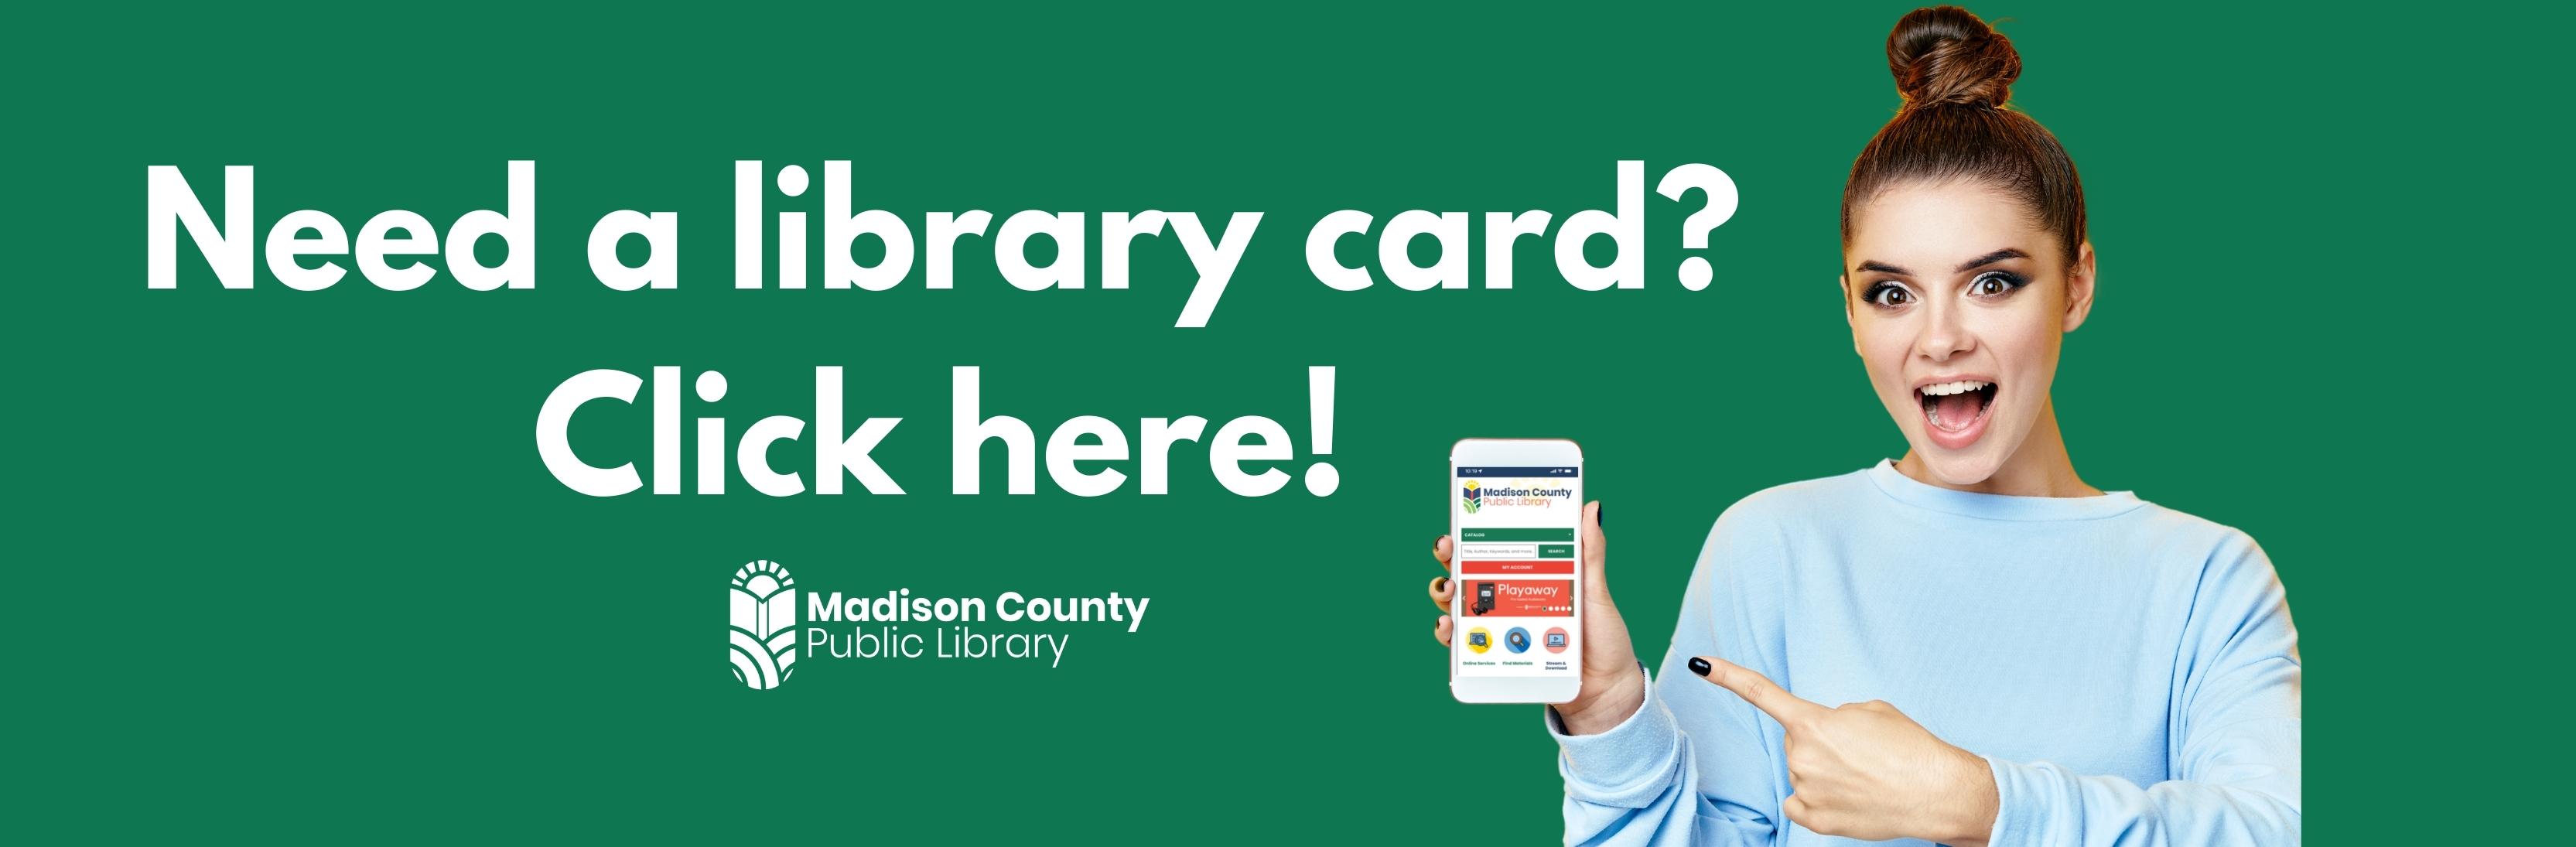 Need a library card